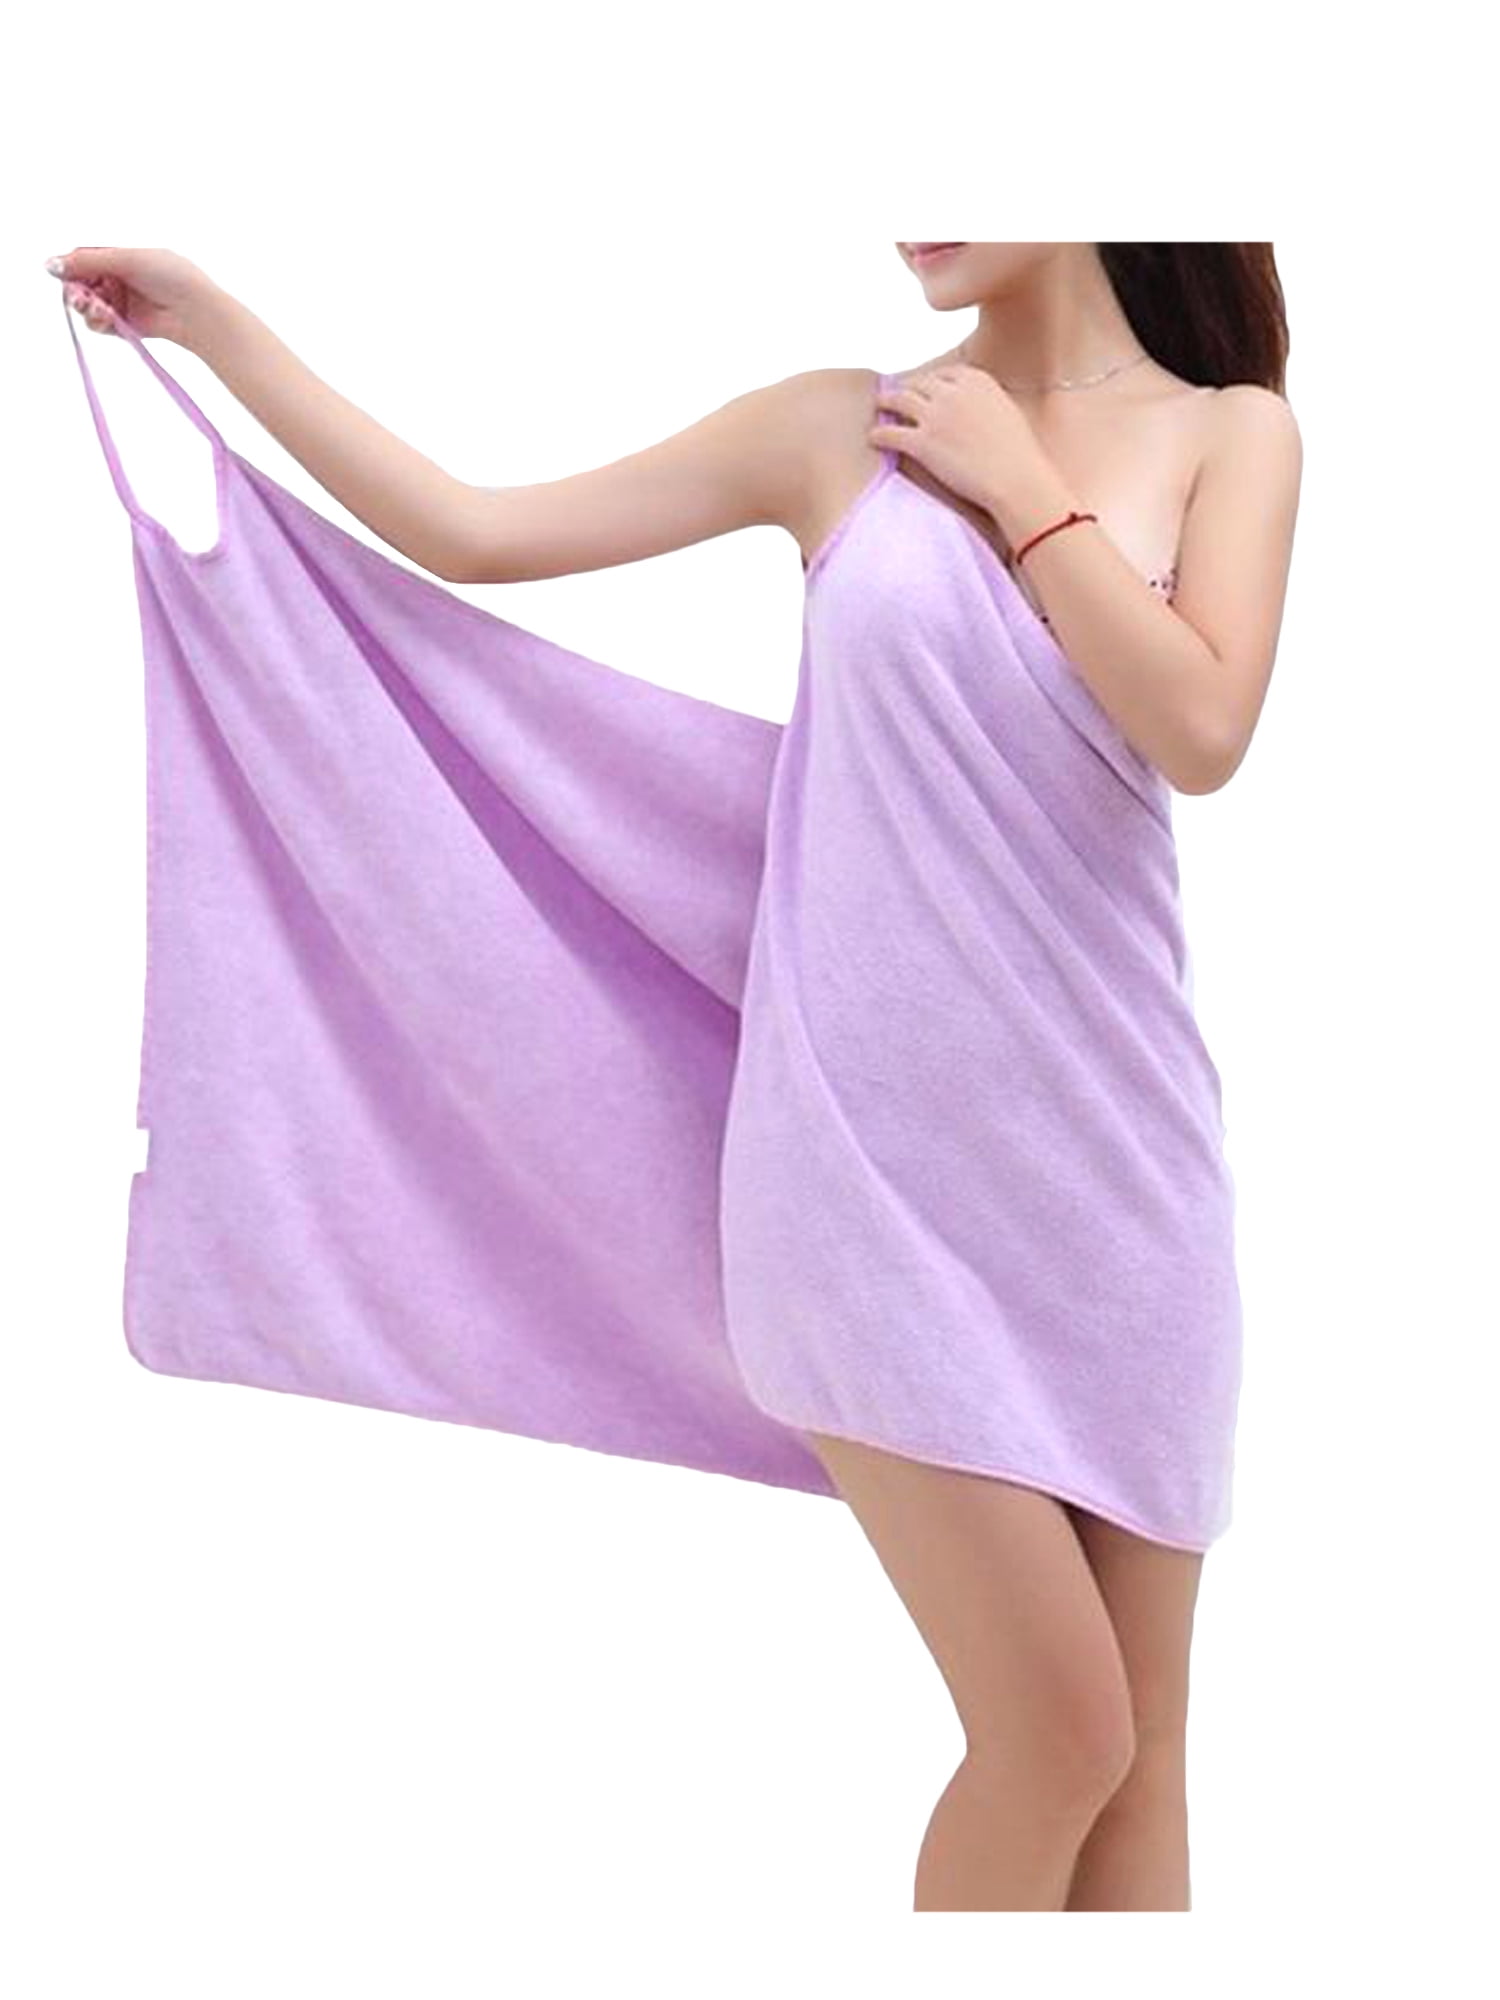 Spa Quality Womens Bath Shops Towels For Adults Perfect Bath Shops Robe, Body  Spa Wrap, And Bath Shops Gown From Monster_guardians, $14.88